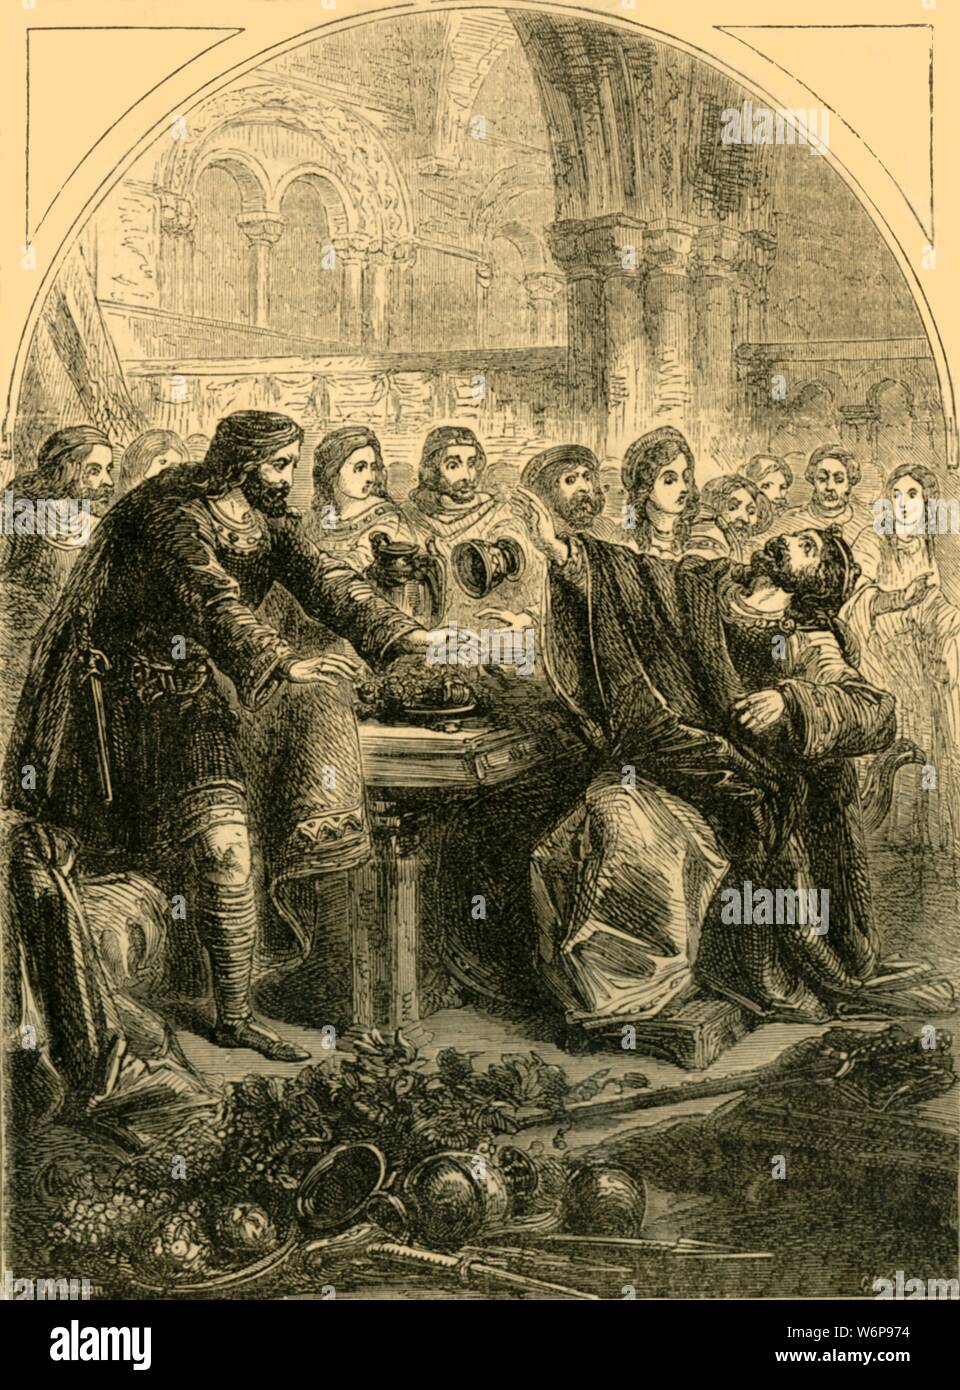 'The Death of Hardicanute', c1890. Harthacnut (c1018-1042), King of Denmark and England died suddenly after consuming alcohol at the wedding of Tovi the Proud to Gytha, daughter of Osgod Clapa in Lambeth. From &quot;Cassell's Illustrated History of England&quot;. Stock Photo